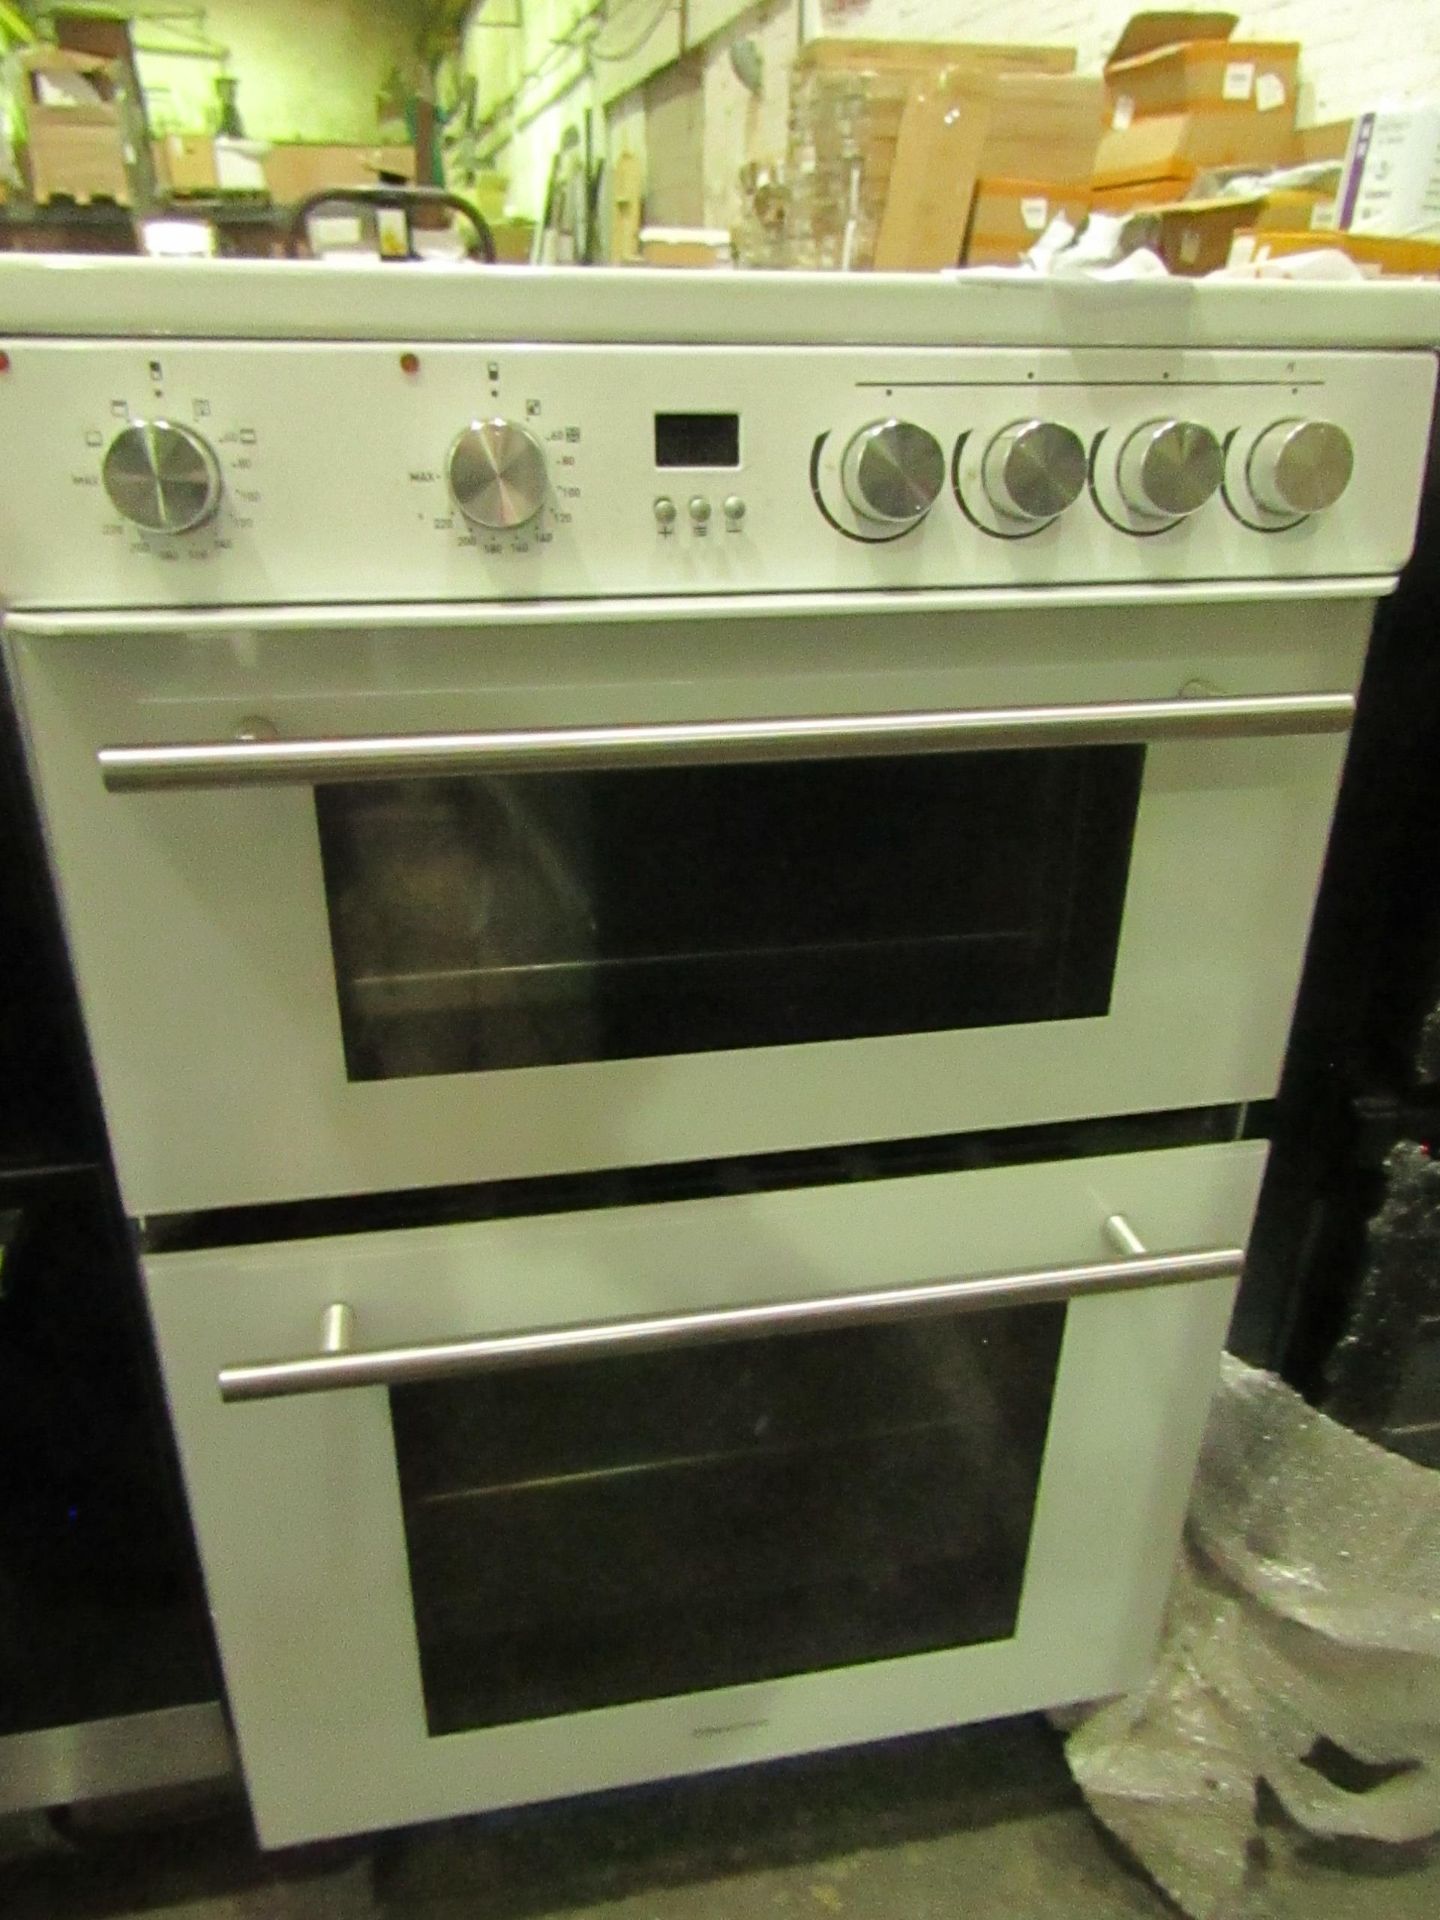 Hisense Double oven with ceramic hob, This item looks to be in good condition and appears ready